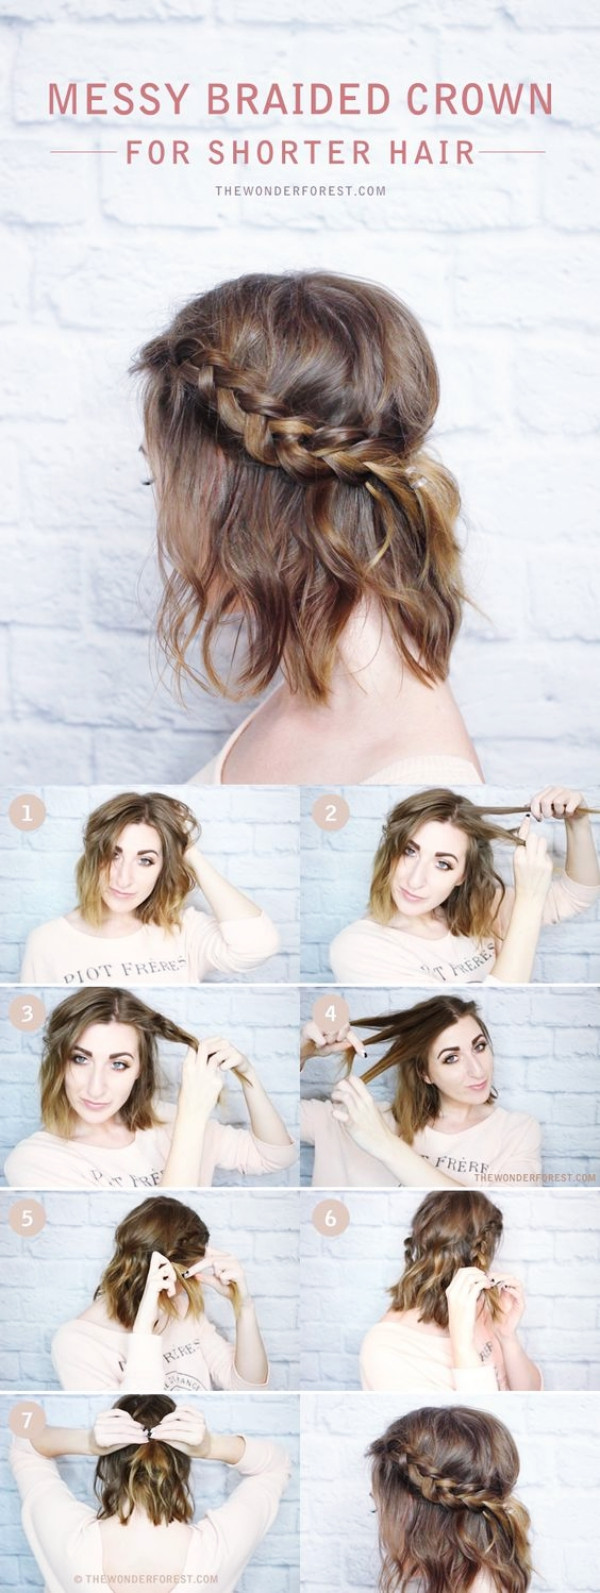 Cute Hairstyles To Do With Short Hair
 40 Easy Hairstyles No Haircuts for Women with Short Hair